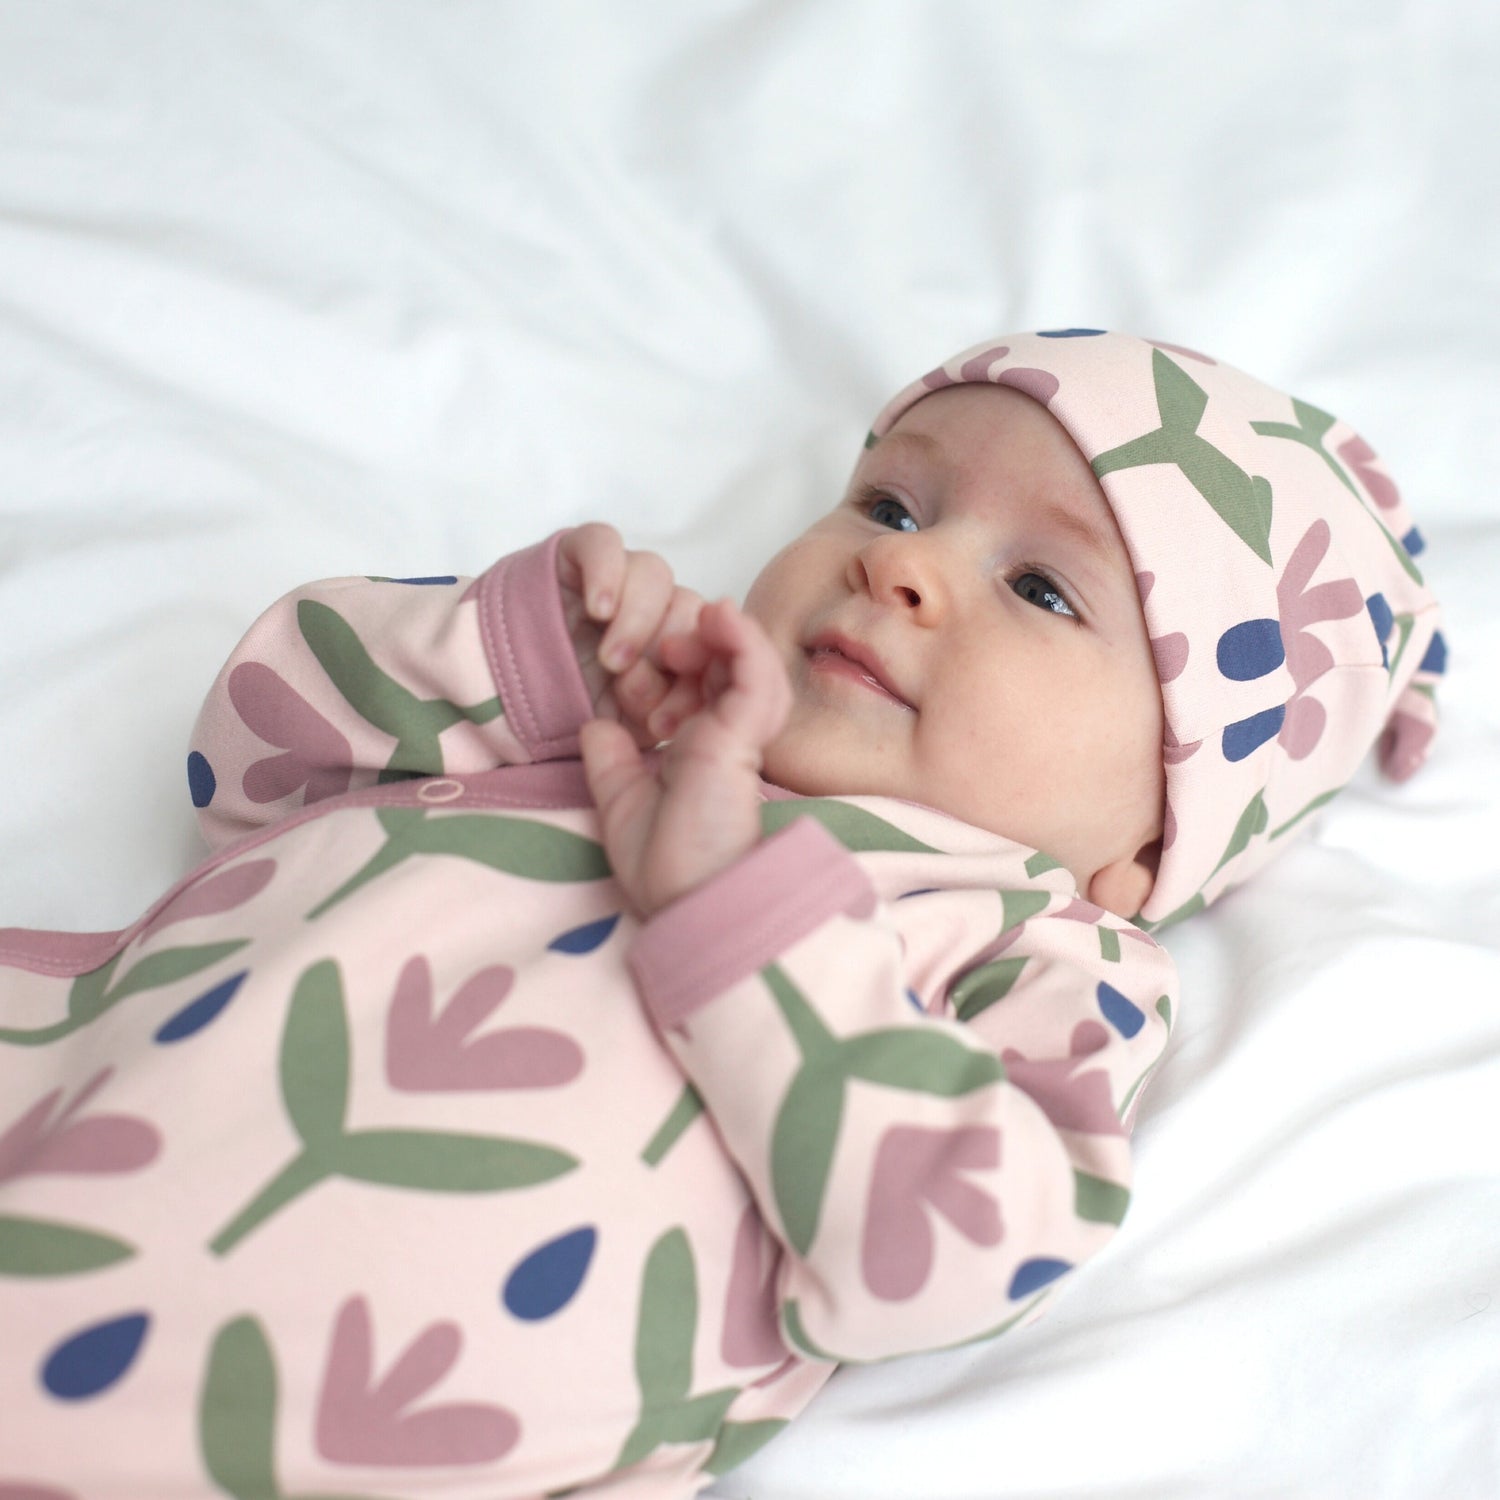 Floral pink knotted hat baby